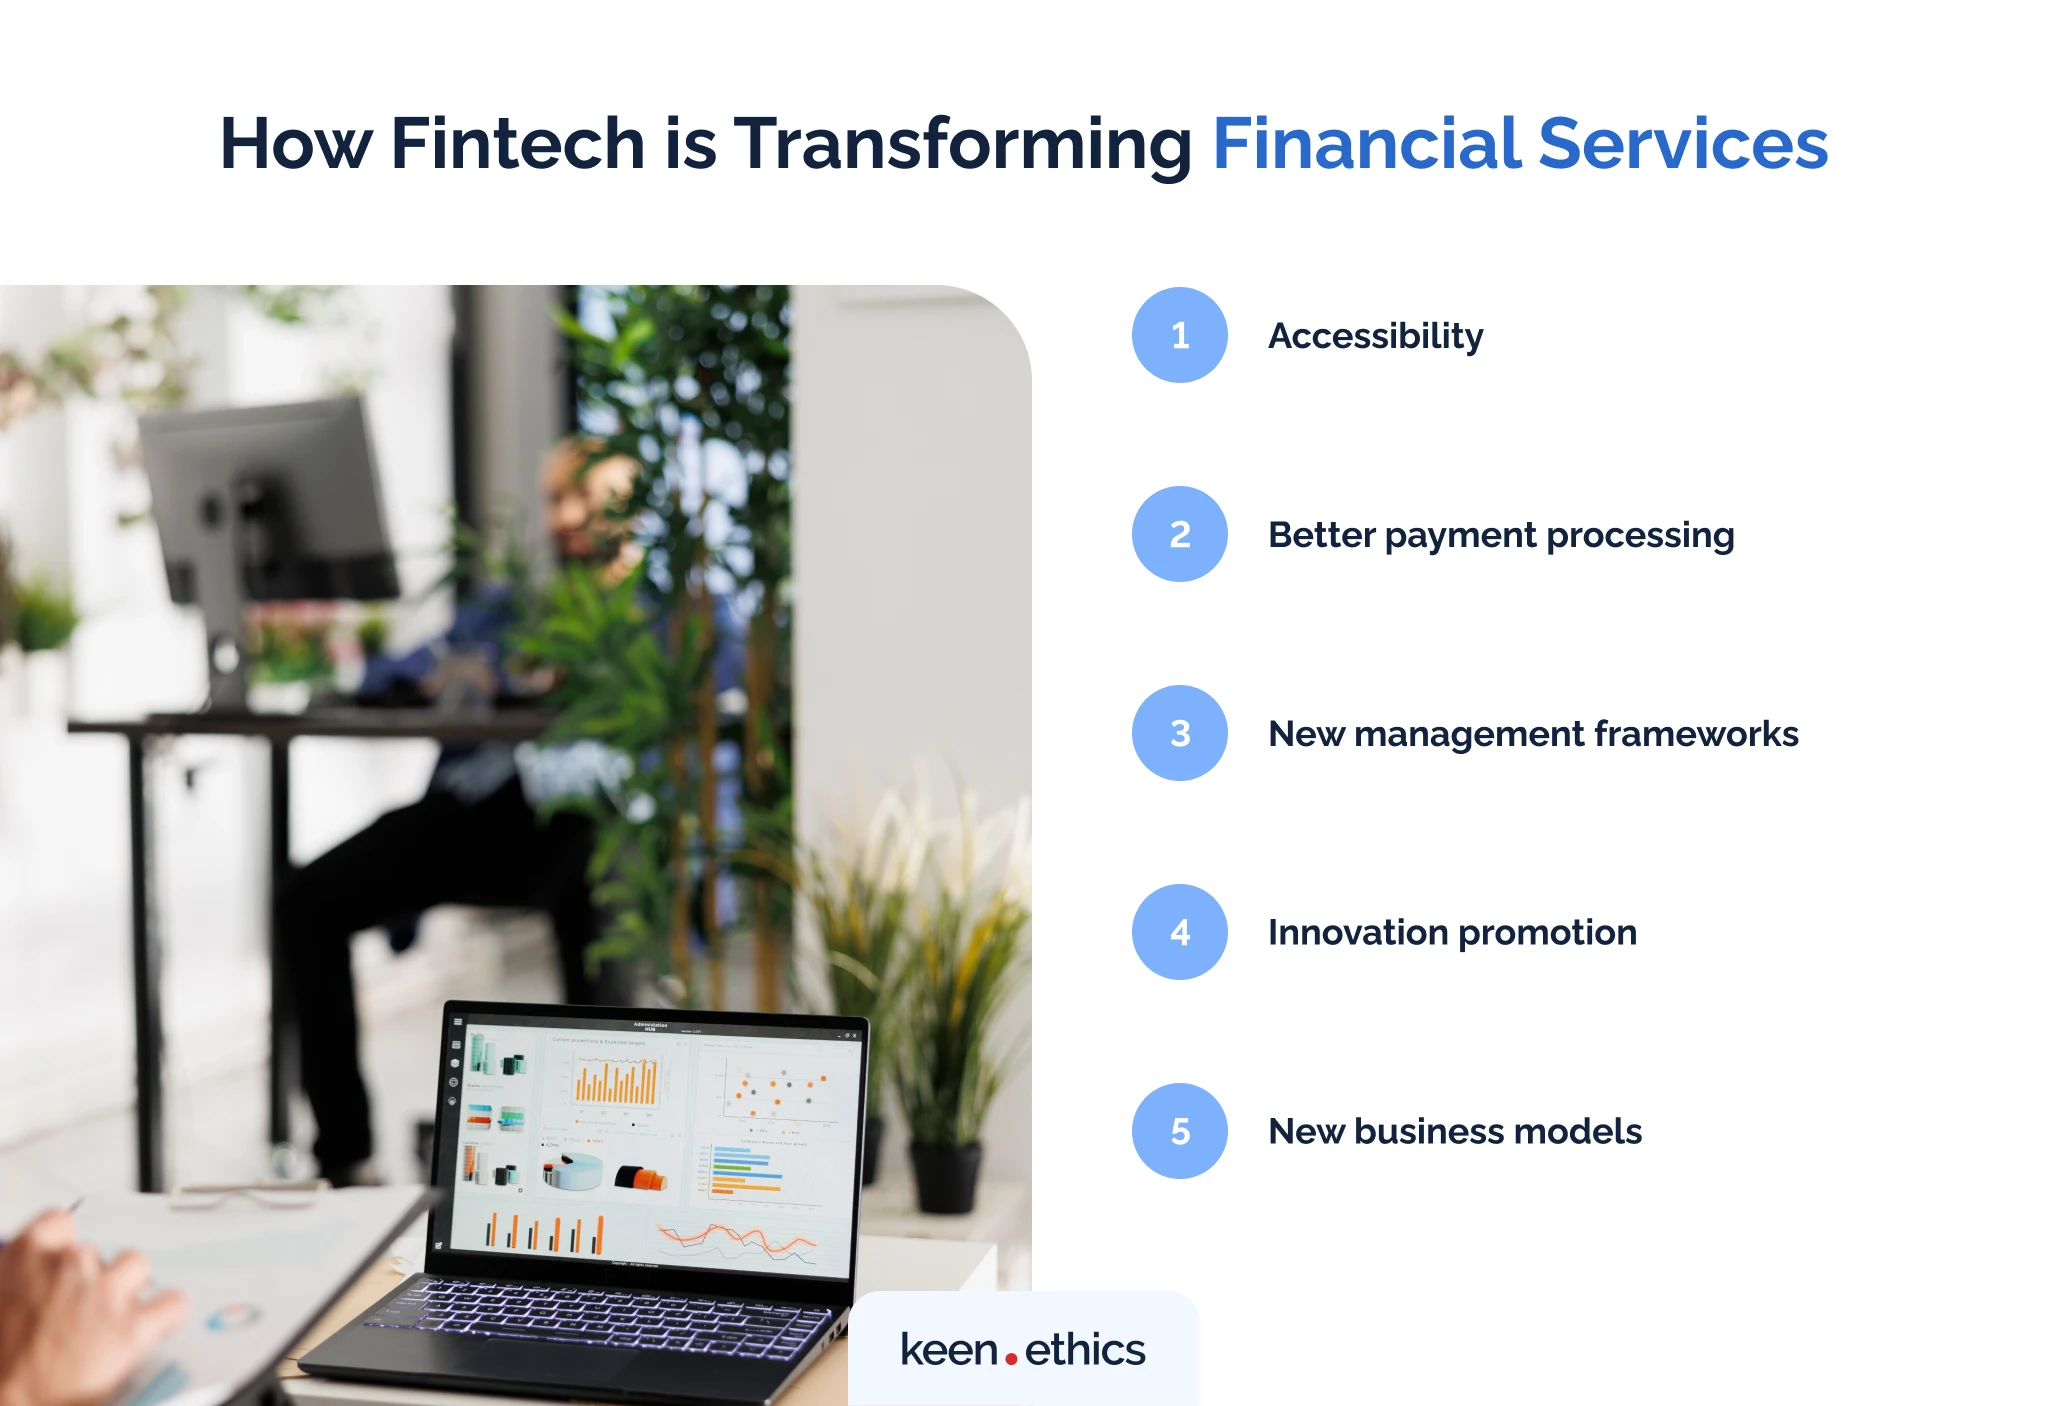 How fintech is transforming financial services